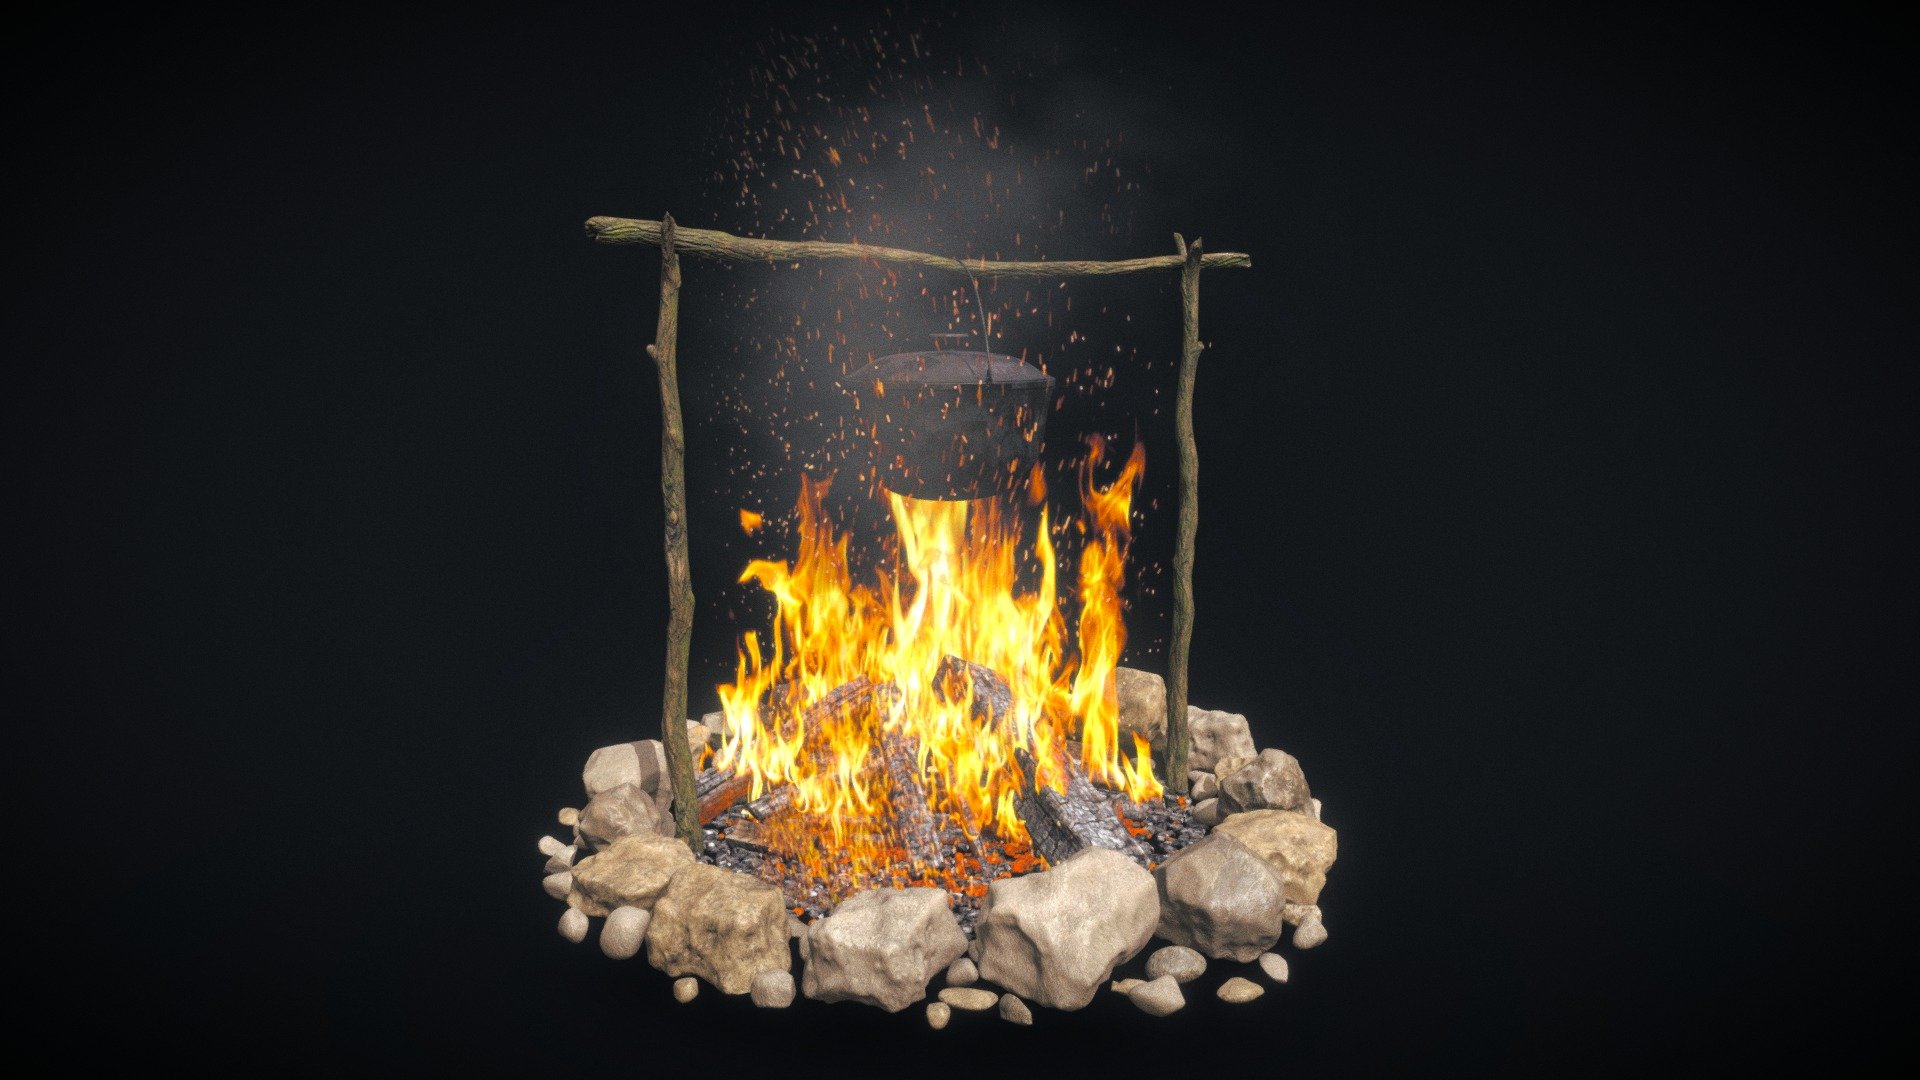 Realistic (copy) 3d model of Bonfire with pot 1.

This set:
- 1 file obj standard
- 1 file 3ds Max 2013 vray material
- 1 file 3ds Max 2013 corona material
- 1 file of 3Ds

Topology of geometry:
- forms and proportions of The 3D model
- the geometry of the model was created very neatly
- there are no many-sided polygons
- detailed enough for close-up renders
- the model optimized for turbosmooth modifier
- Not collapsed the turbosmooth modified
- apply the Smooth modifier with a parameter to get the desired level of detail

Materials and Textures:
- 3ds max files included Vray-Shaders
- 3ds max files included Corona-Shaders
- all texture paths are cleared

Organization of scene:
- to all objects and materials
- real world size (system units - mm)
- coordinates of location of the model in space (x0, y0, z0)
- does not contain extraneous or hidden objects (lights, cameras, shapes etc.)

Renders:
- all previews rendered 3ds max Vray
- the model is completely ready for use visualization in 3ds max + Vray+Corona - Bonfire with pot 1 - Buy Royalty Free 3D model by madMIX 3d model